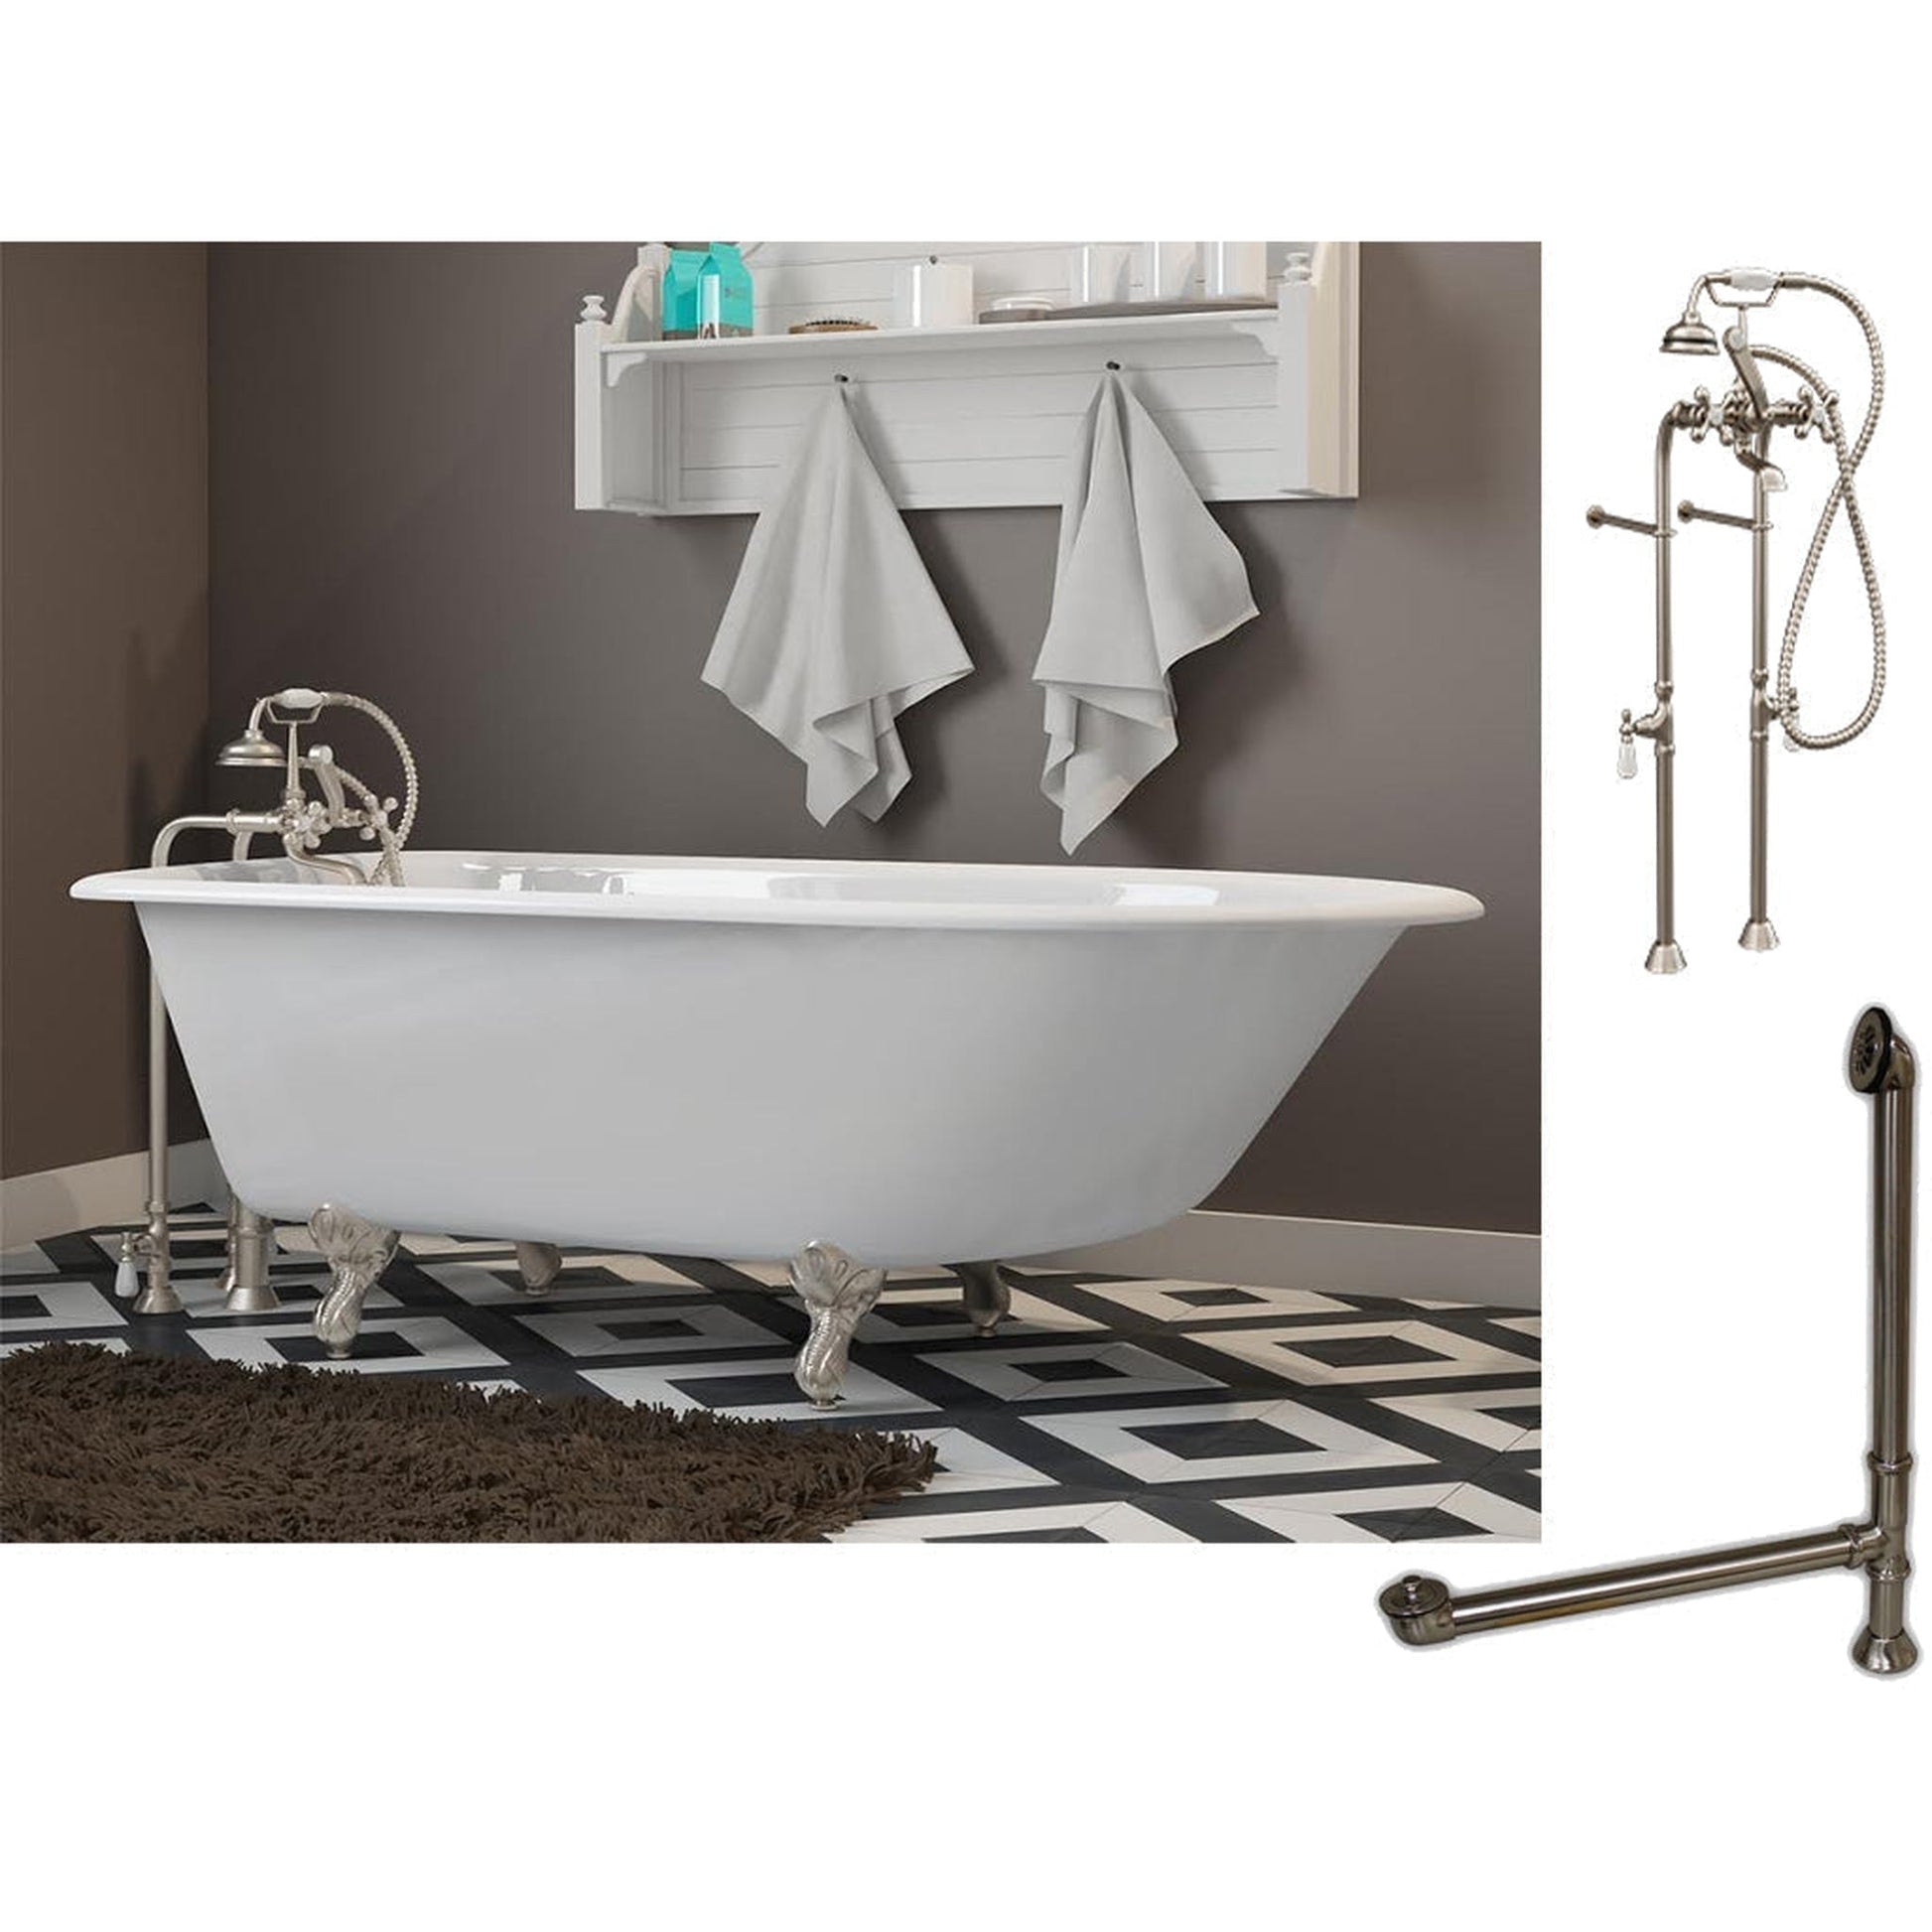 Cambridge Plumbing 54" White Cast Iron Rolled Rim Clawfoot Bathtub With No Deck Holes And Complete Plumbing Package Including Floor Mounted British Telephone Faucet, Drain And Overflow Assembly In Brushed Nickel